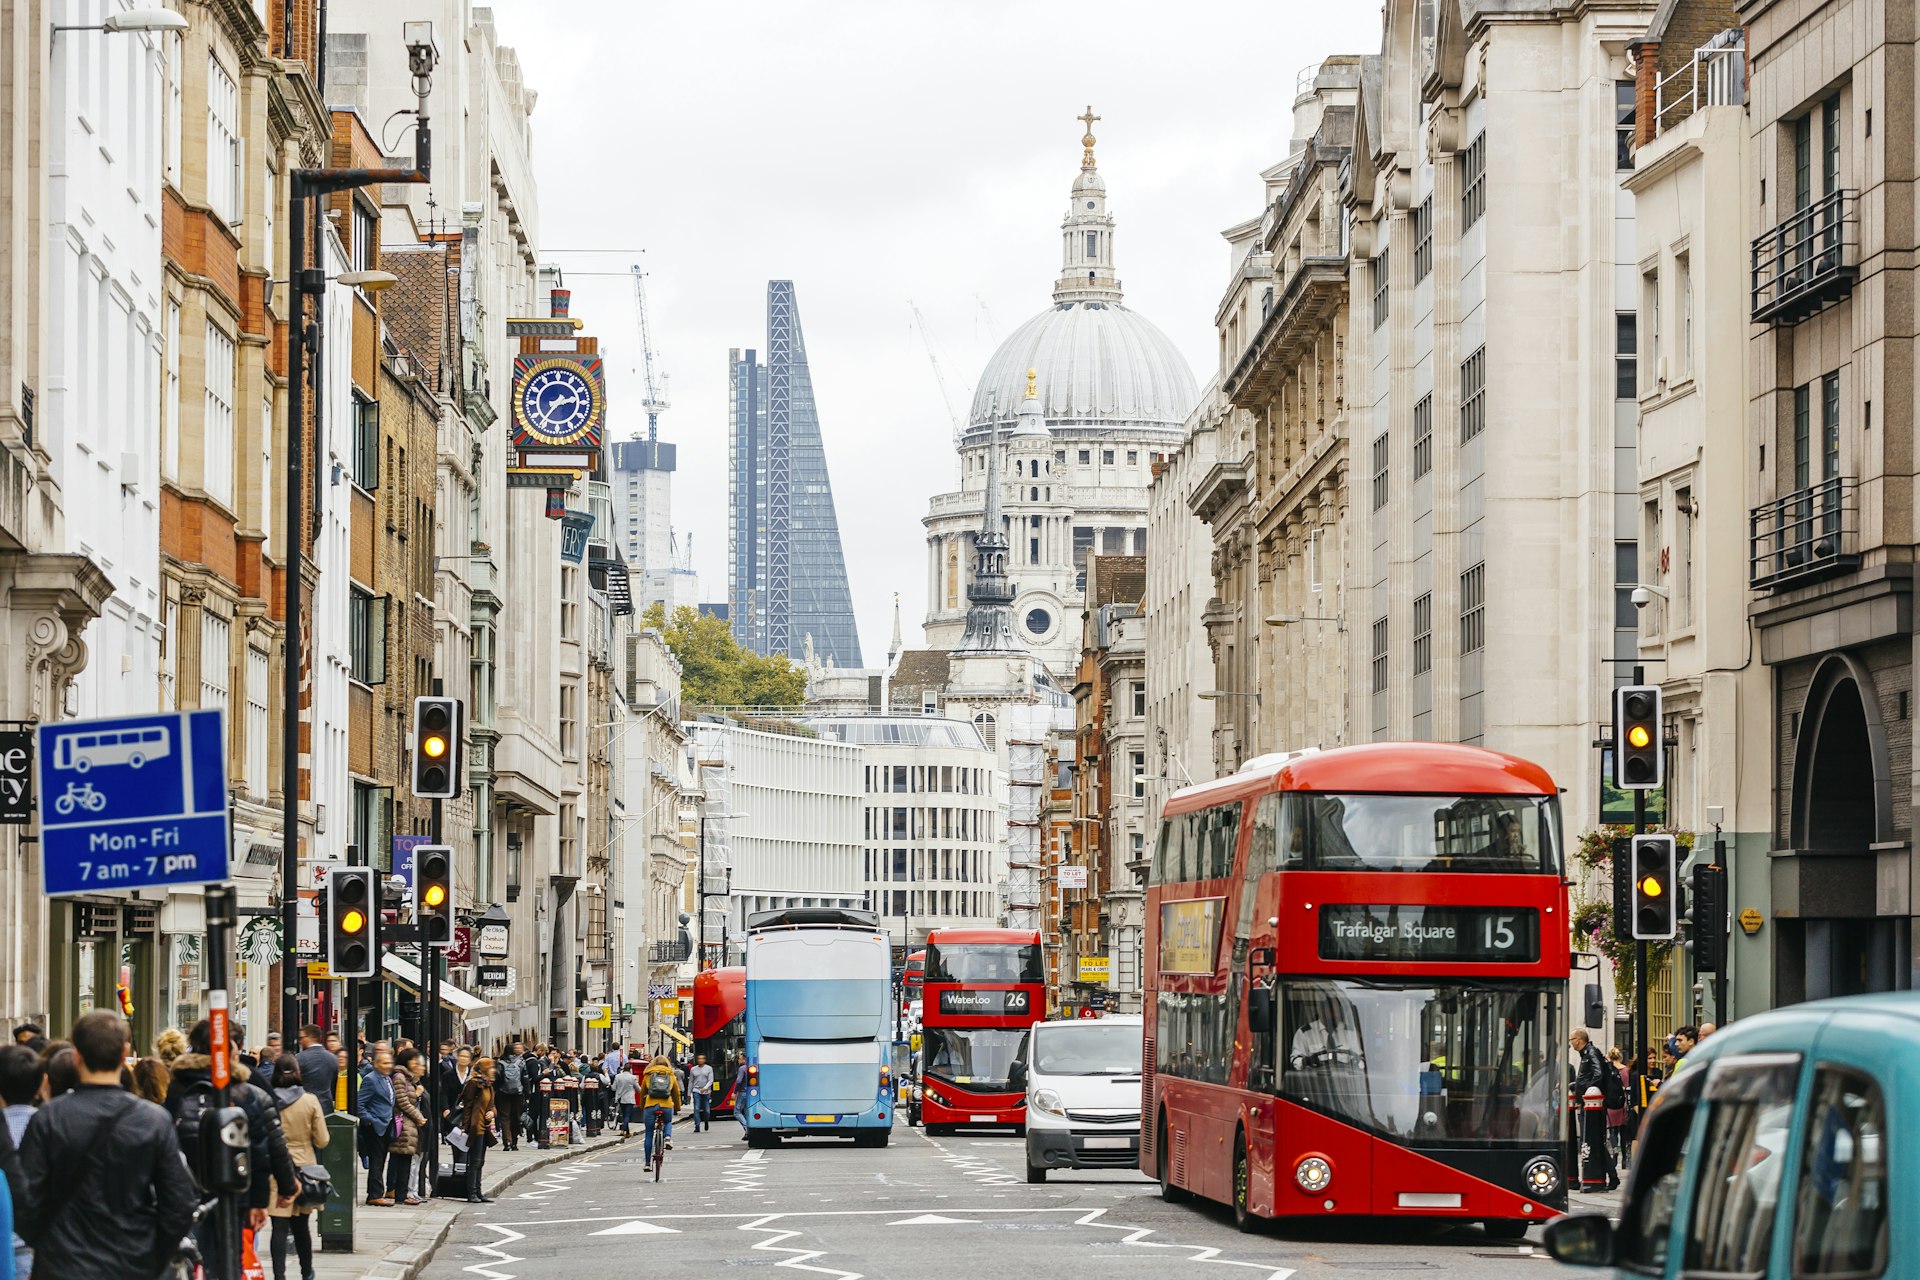 The busy streets of London with the dome of St. Paul's Cathedral in the background